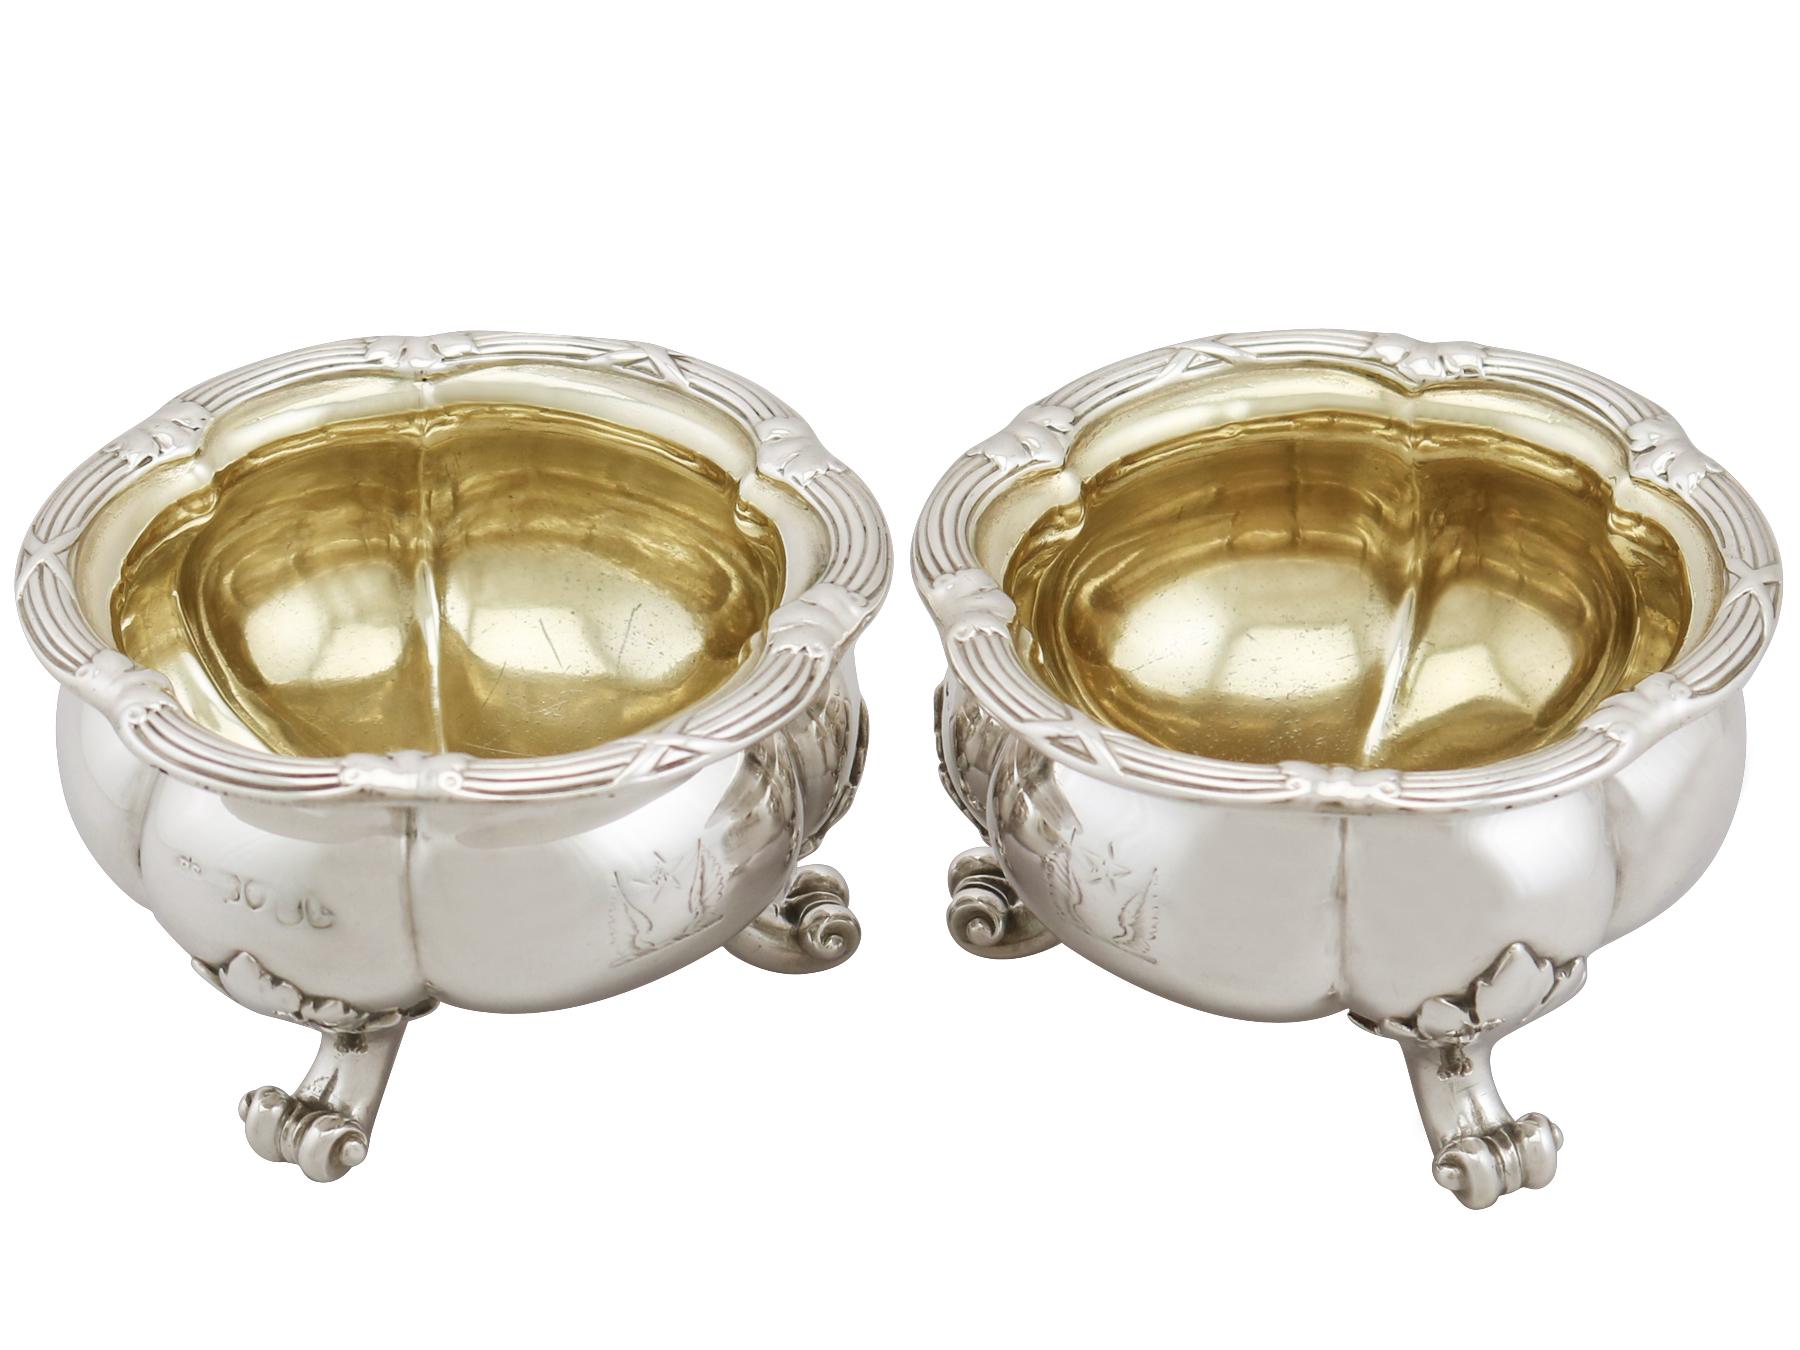 An exceptional, fine and impressive pair of antique Victorian English sterling silver salts made by Paul Storr; an addition to our silver cruet and condiment collection.

These exceptional antique Victorian sterling silver salts have a circular